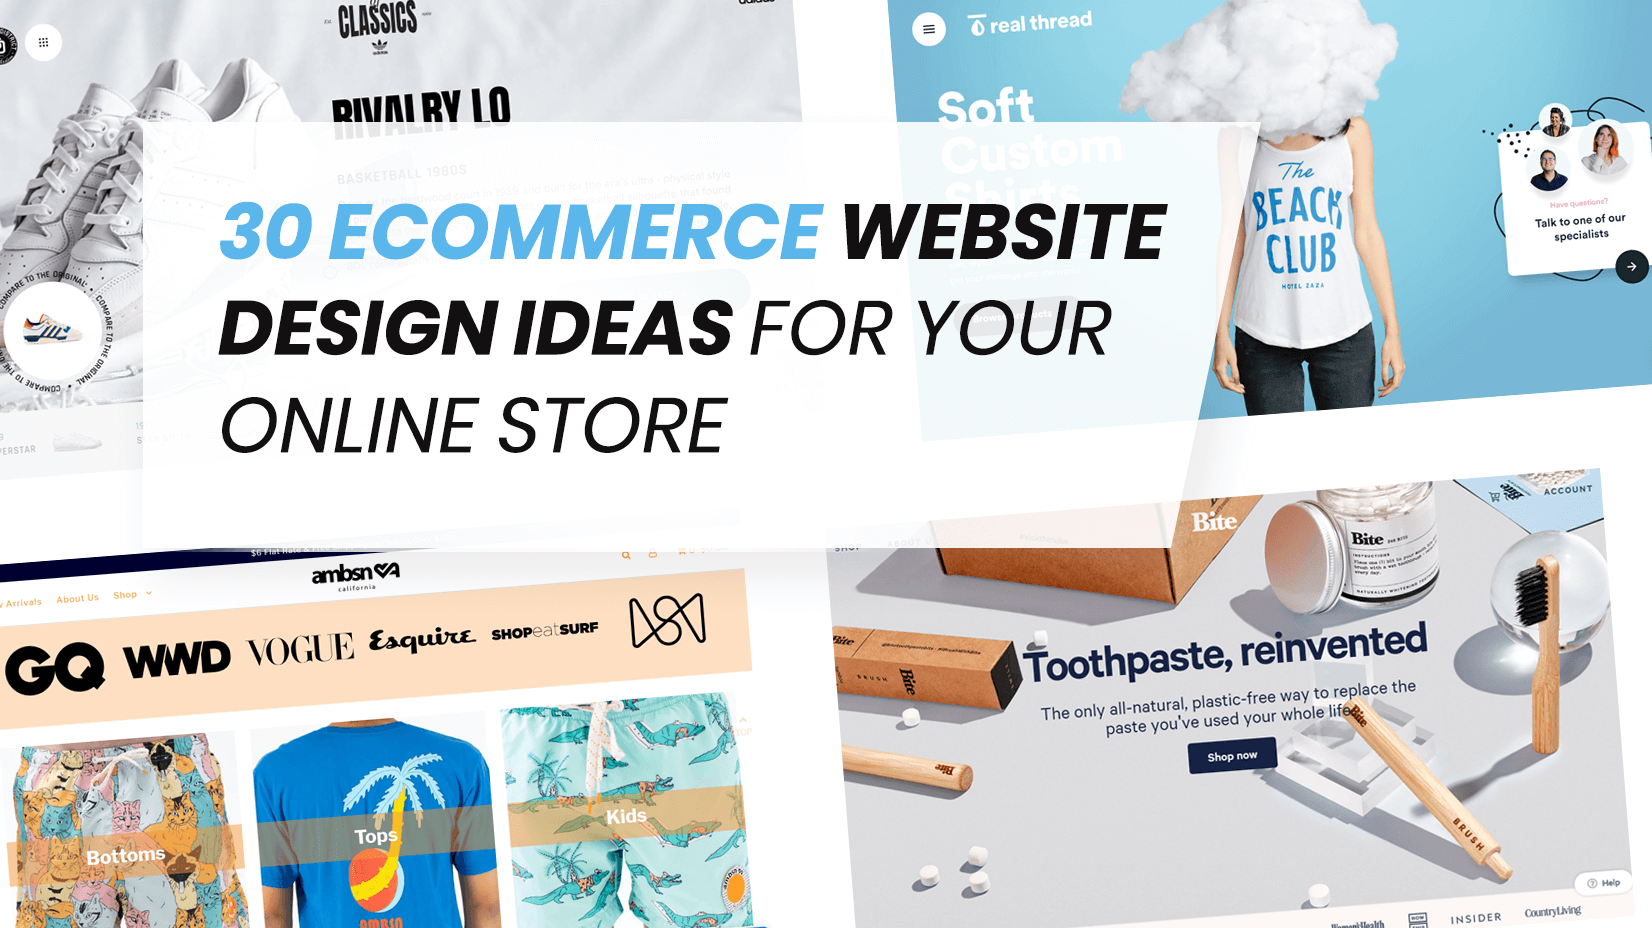 How to design websites and online stores?